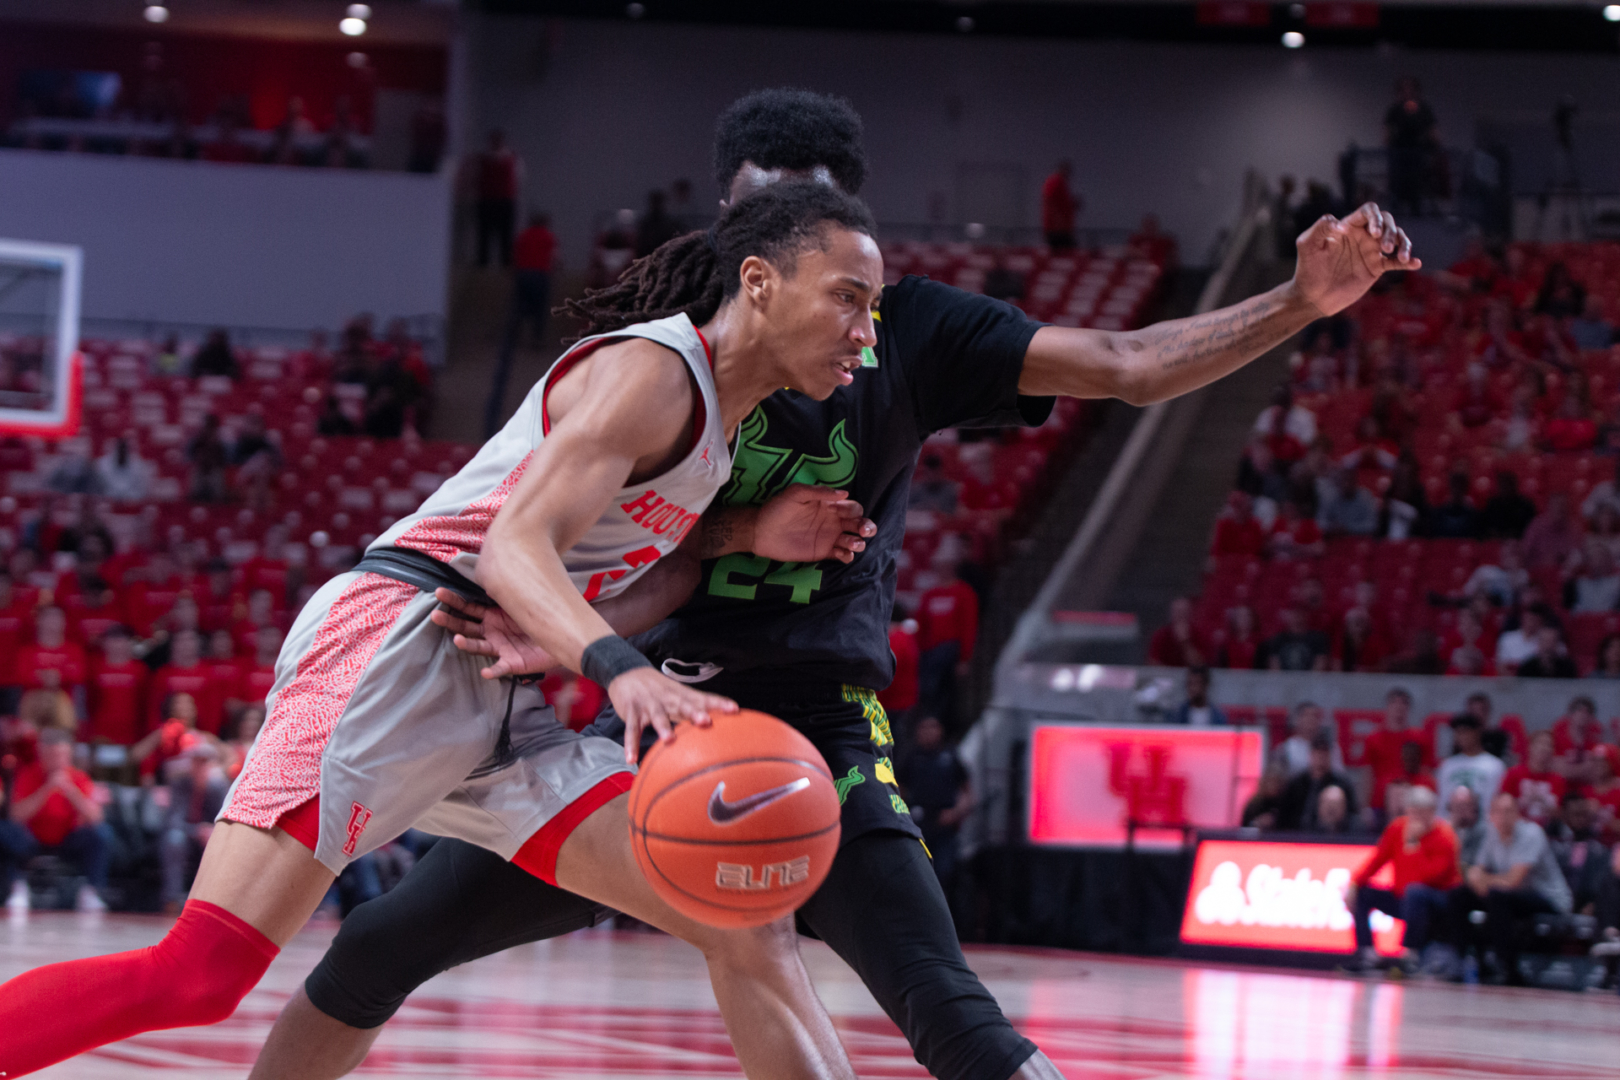 Redshirt freshman guard Caleb Mills had 11 points and three rebounds on Jan. 26 when the Cougars hosted the Bulls in the first meeting. | Kathryn Lenihan/ The Cougar